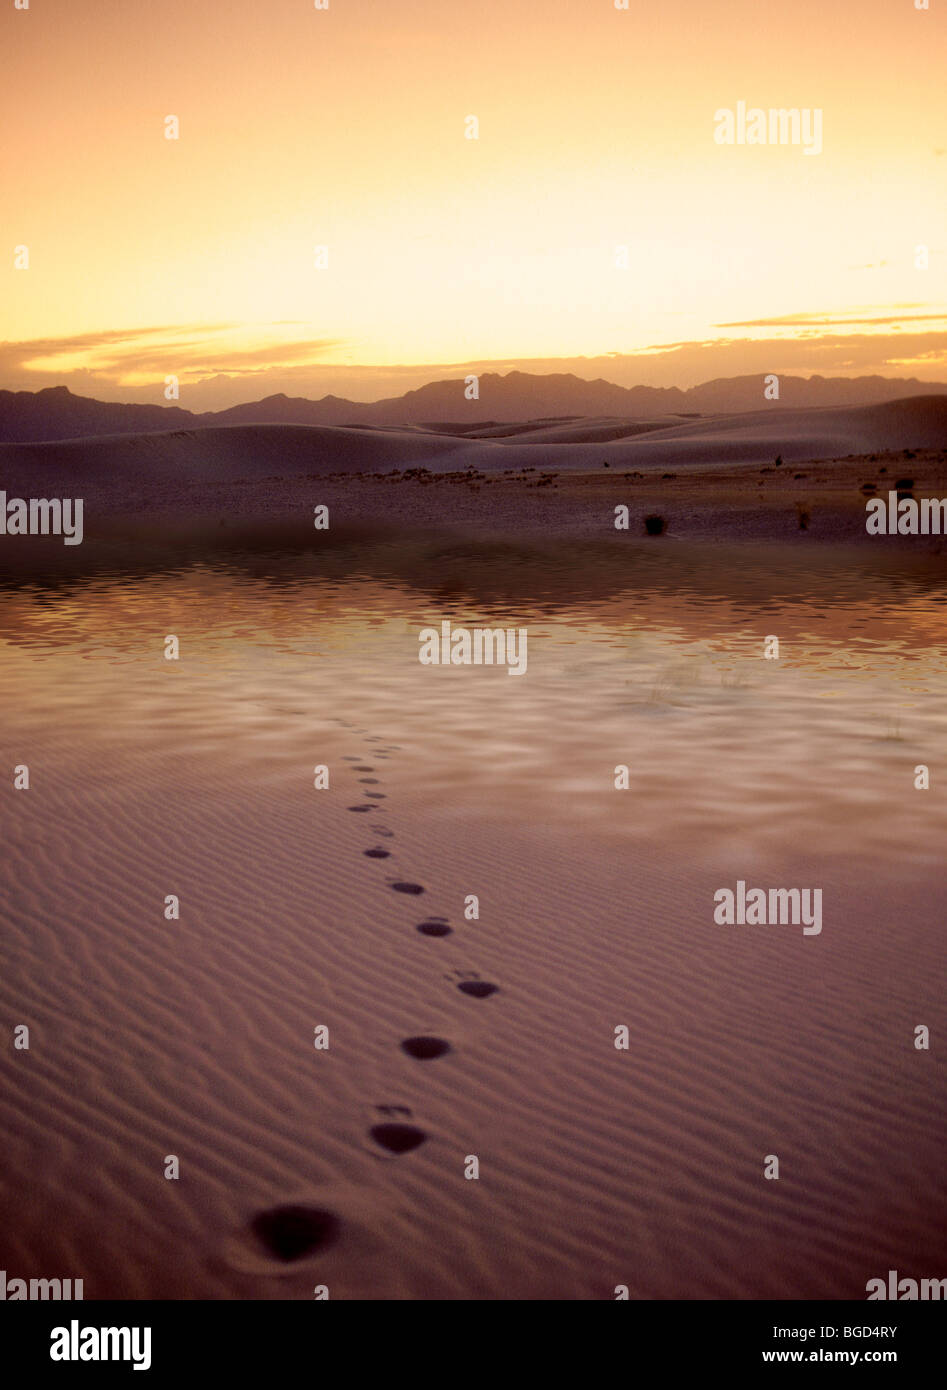 Footprints leading to water in the desert. Stock Photo